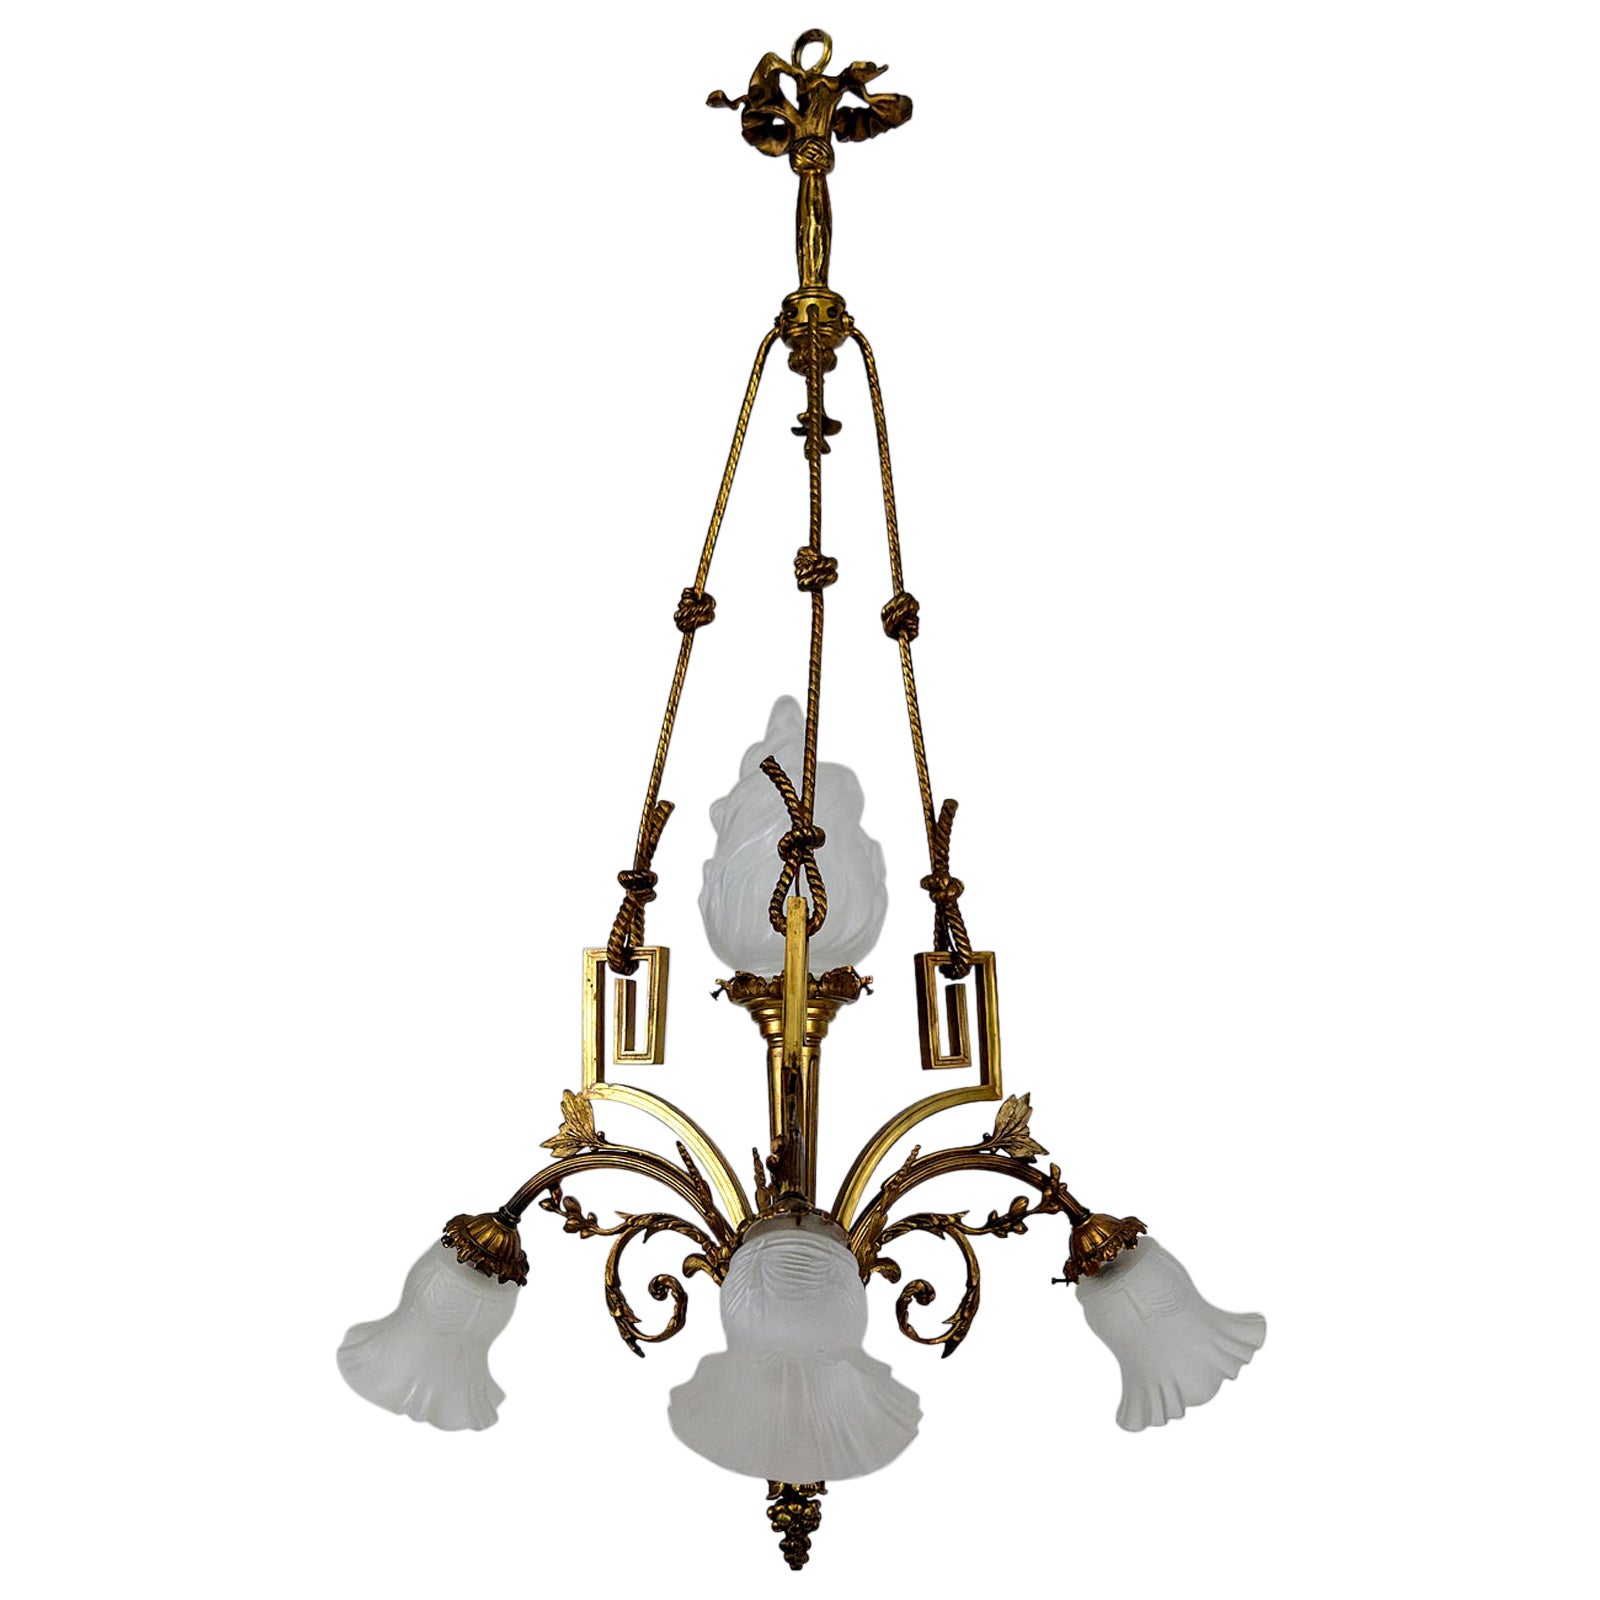 Louis XVI / Neoclassical style chandelier in gilded bronze, France, Circa 1900